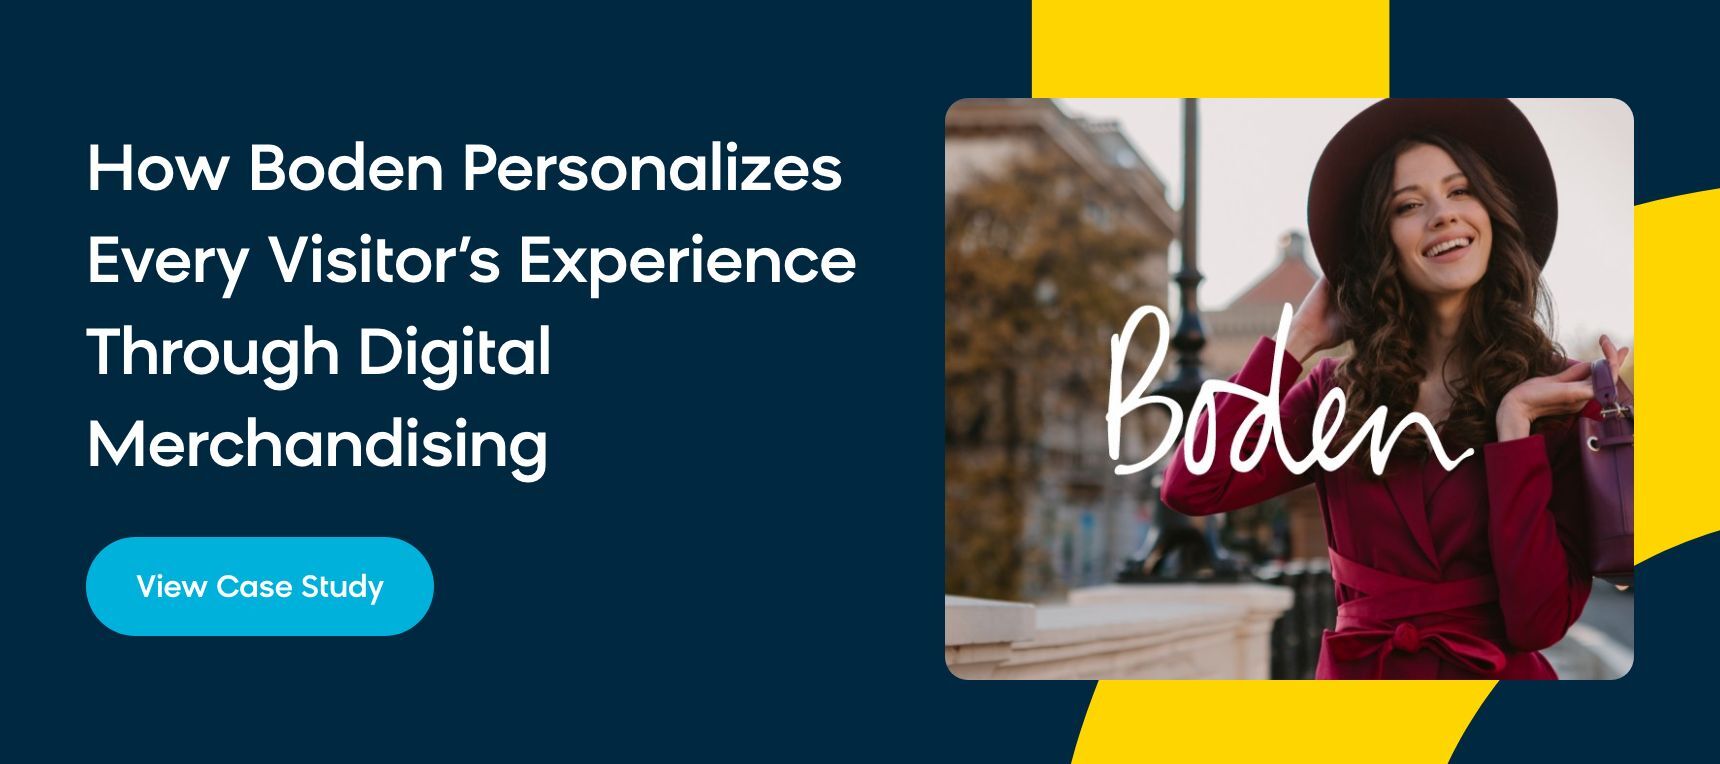 How Boden personalizes every visitor's experience through digital merchandising